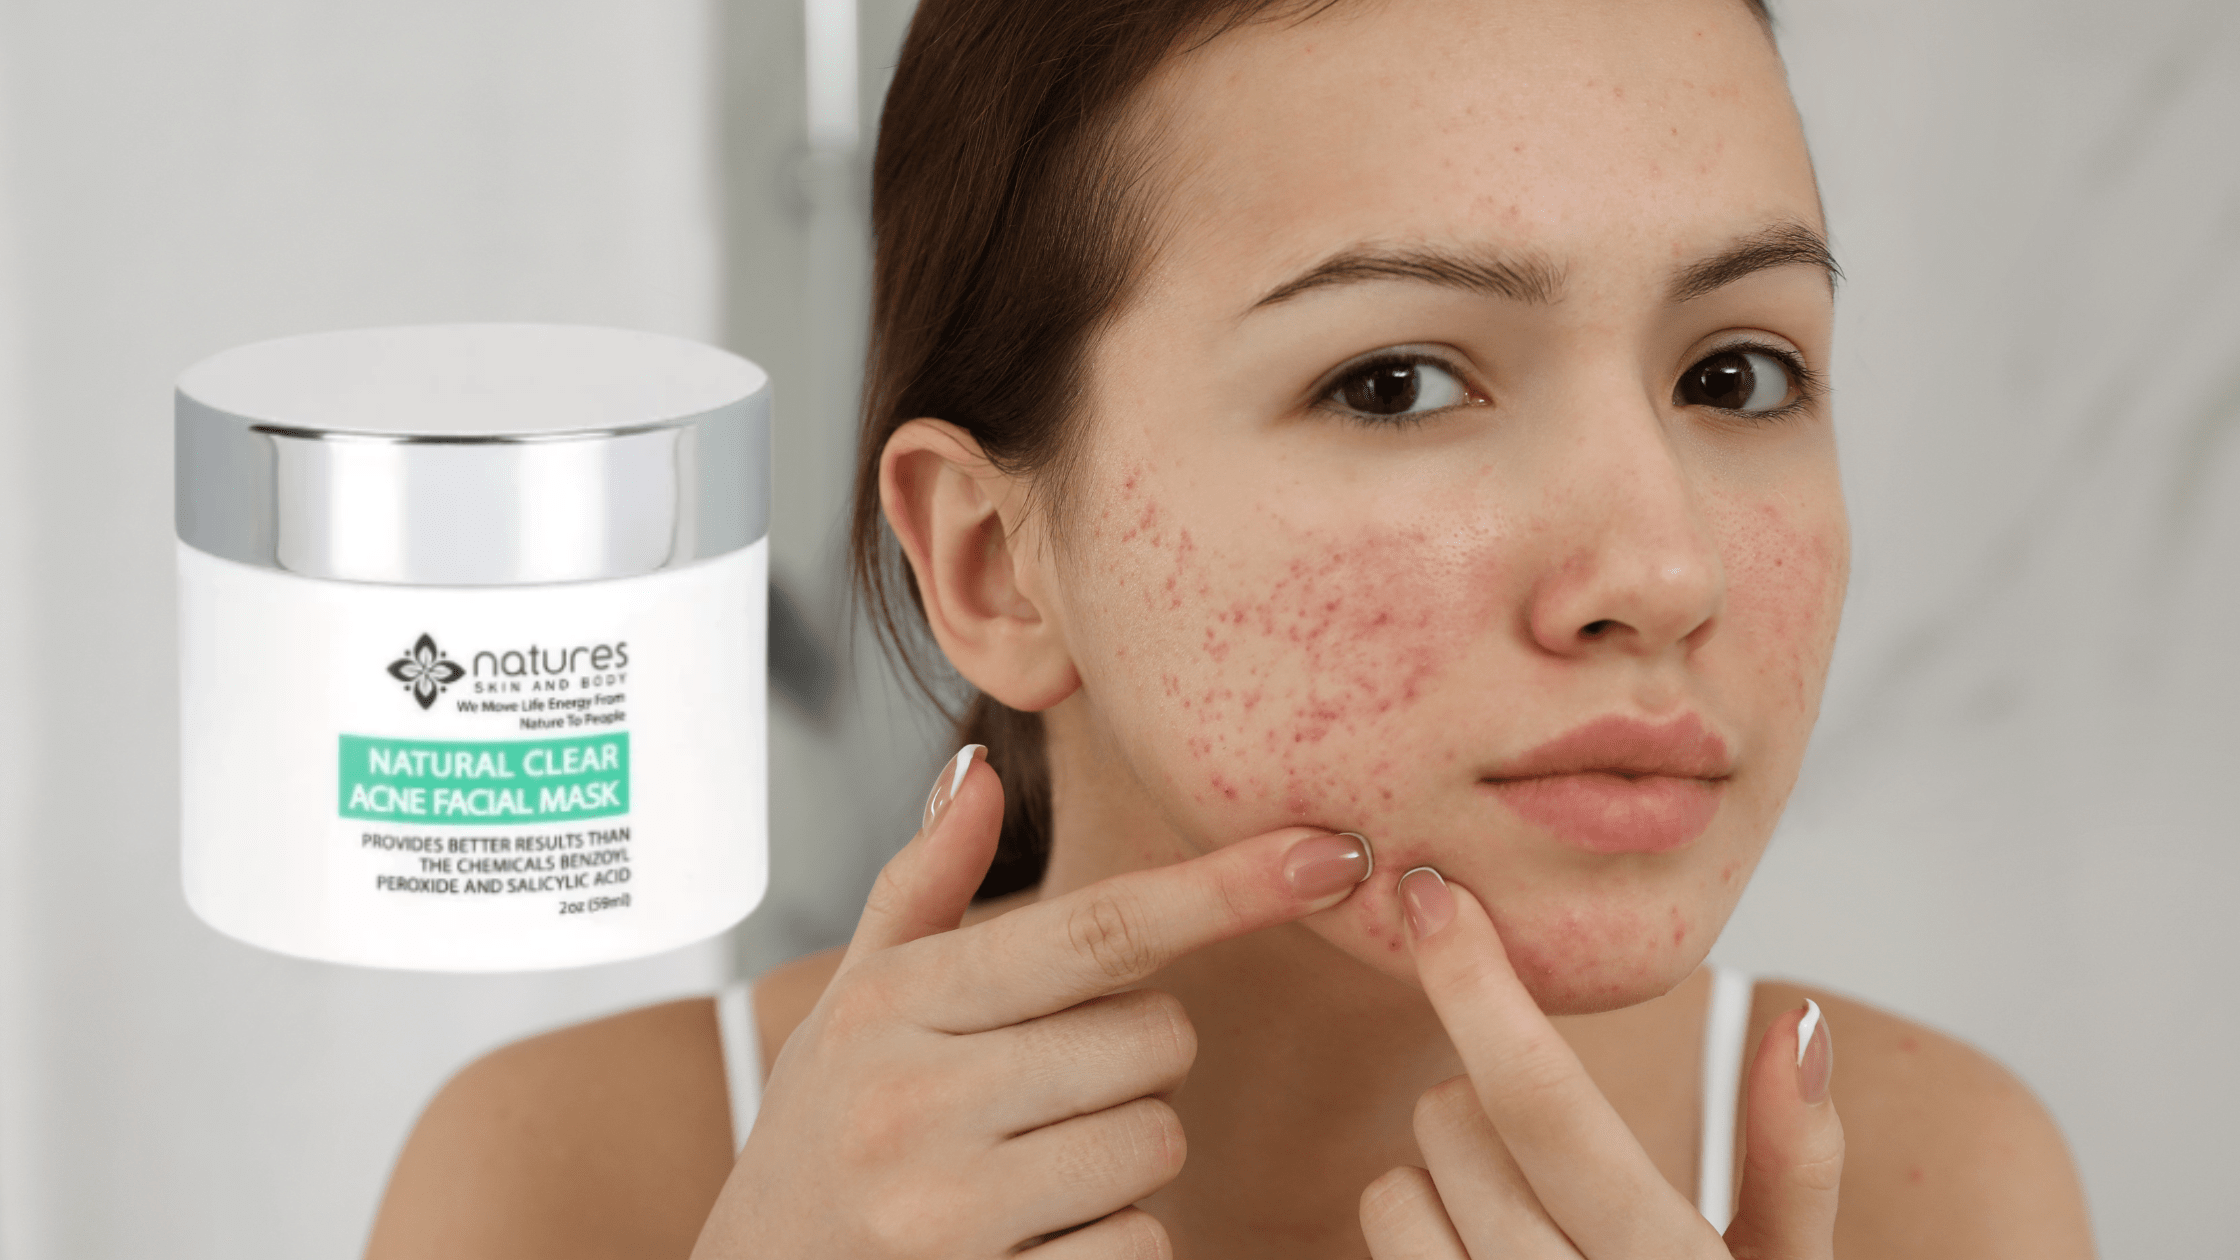 What is the root cause of acne and what is the best product to keep your skin clear?